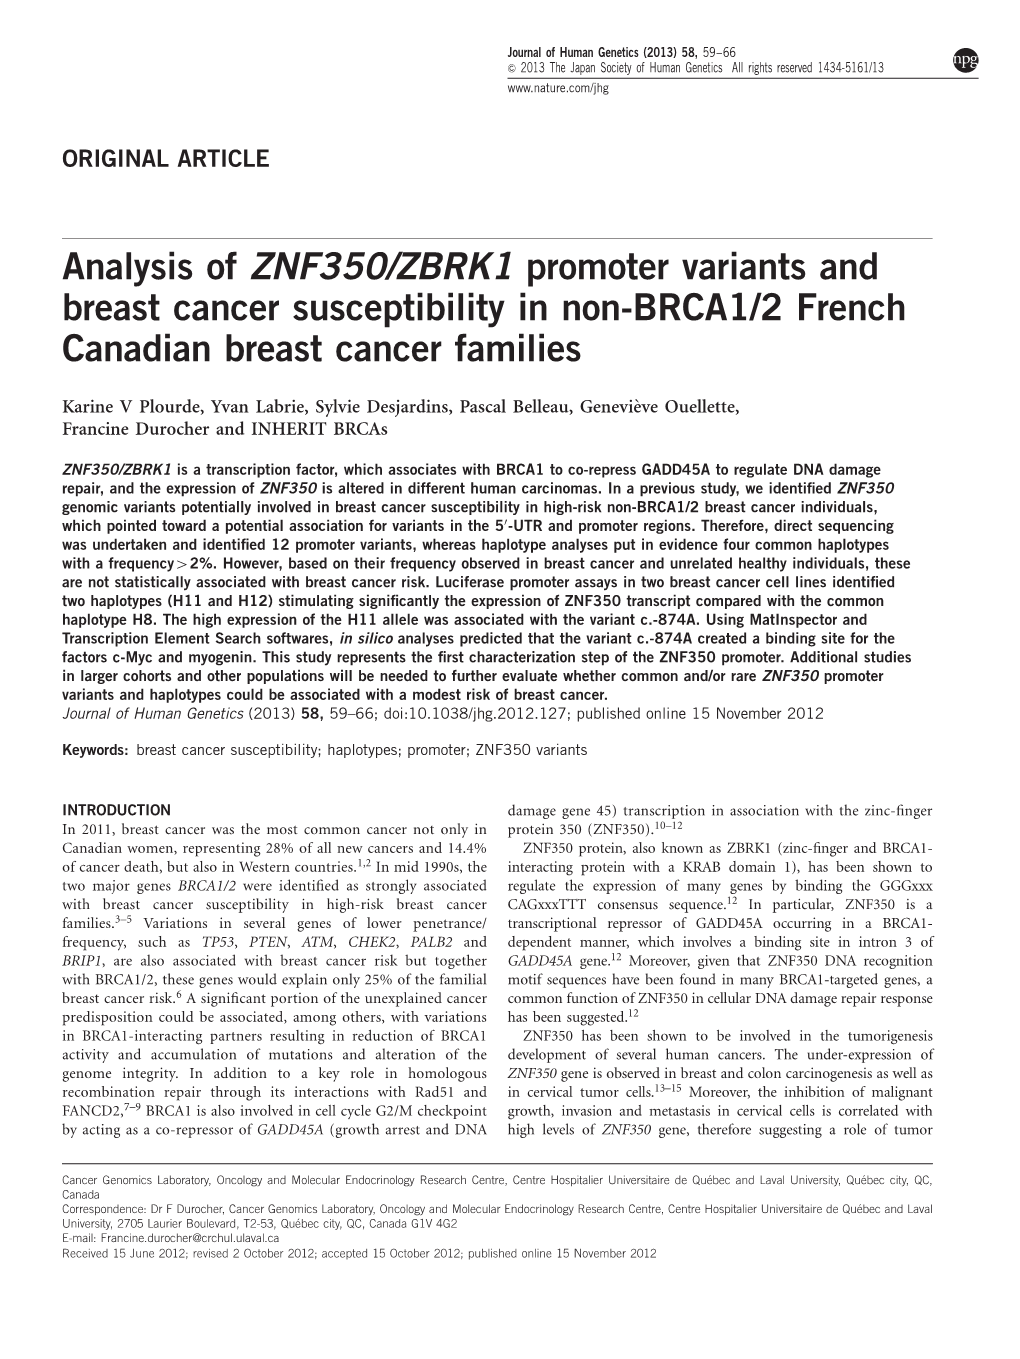 ZBRK1 Promoter Variants and Breast Cancer Susceptibility in Non-BRCA1/2 French Canadian Breast Cancer Families